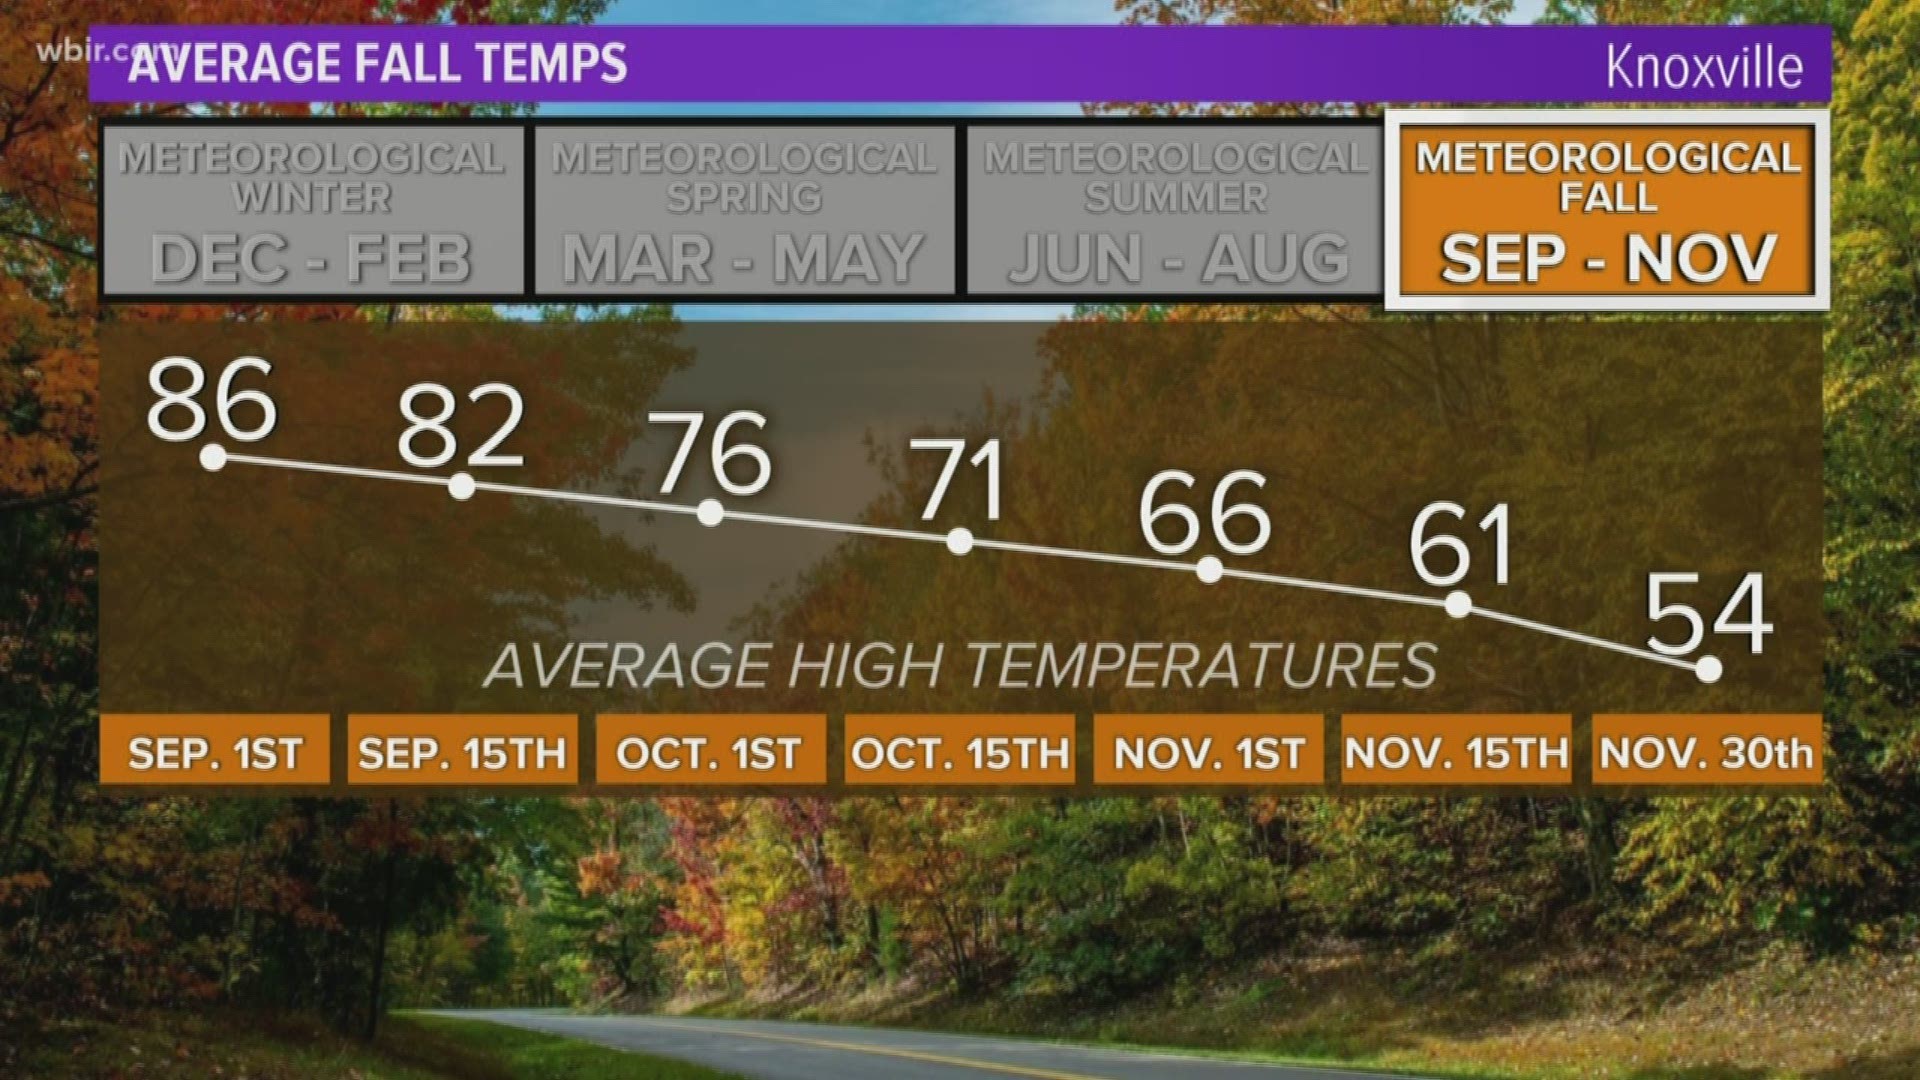 We've gone from record heat to fall-like temperatures in just a few days.